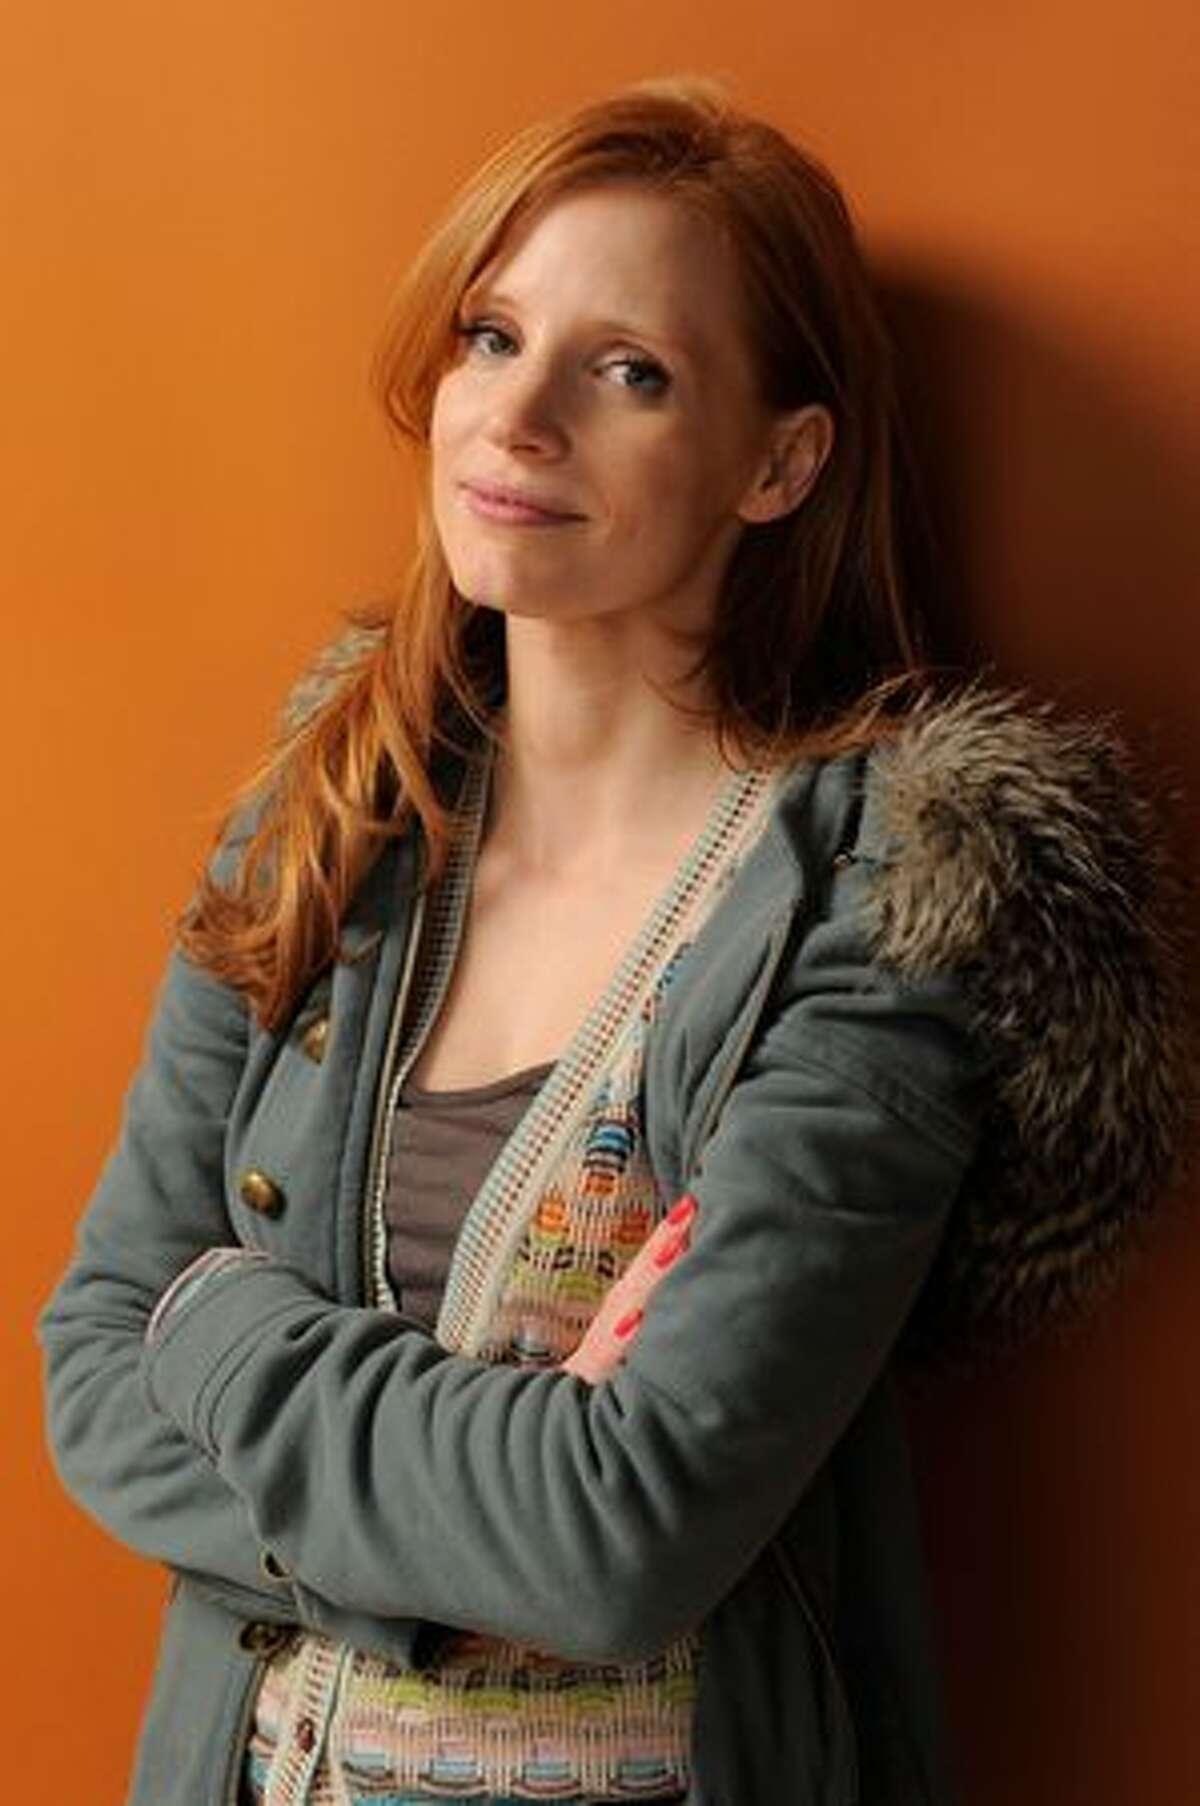 Actress Jessica Chastain poses for a portrait during the 2011 Sundance Film Festival at The Samsung Galaxy Tab Lift on January 25, 2011 in Park City, Utah.